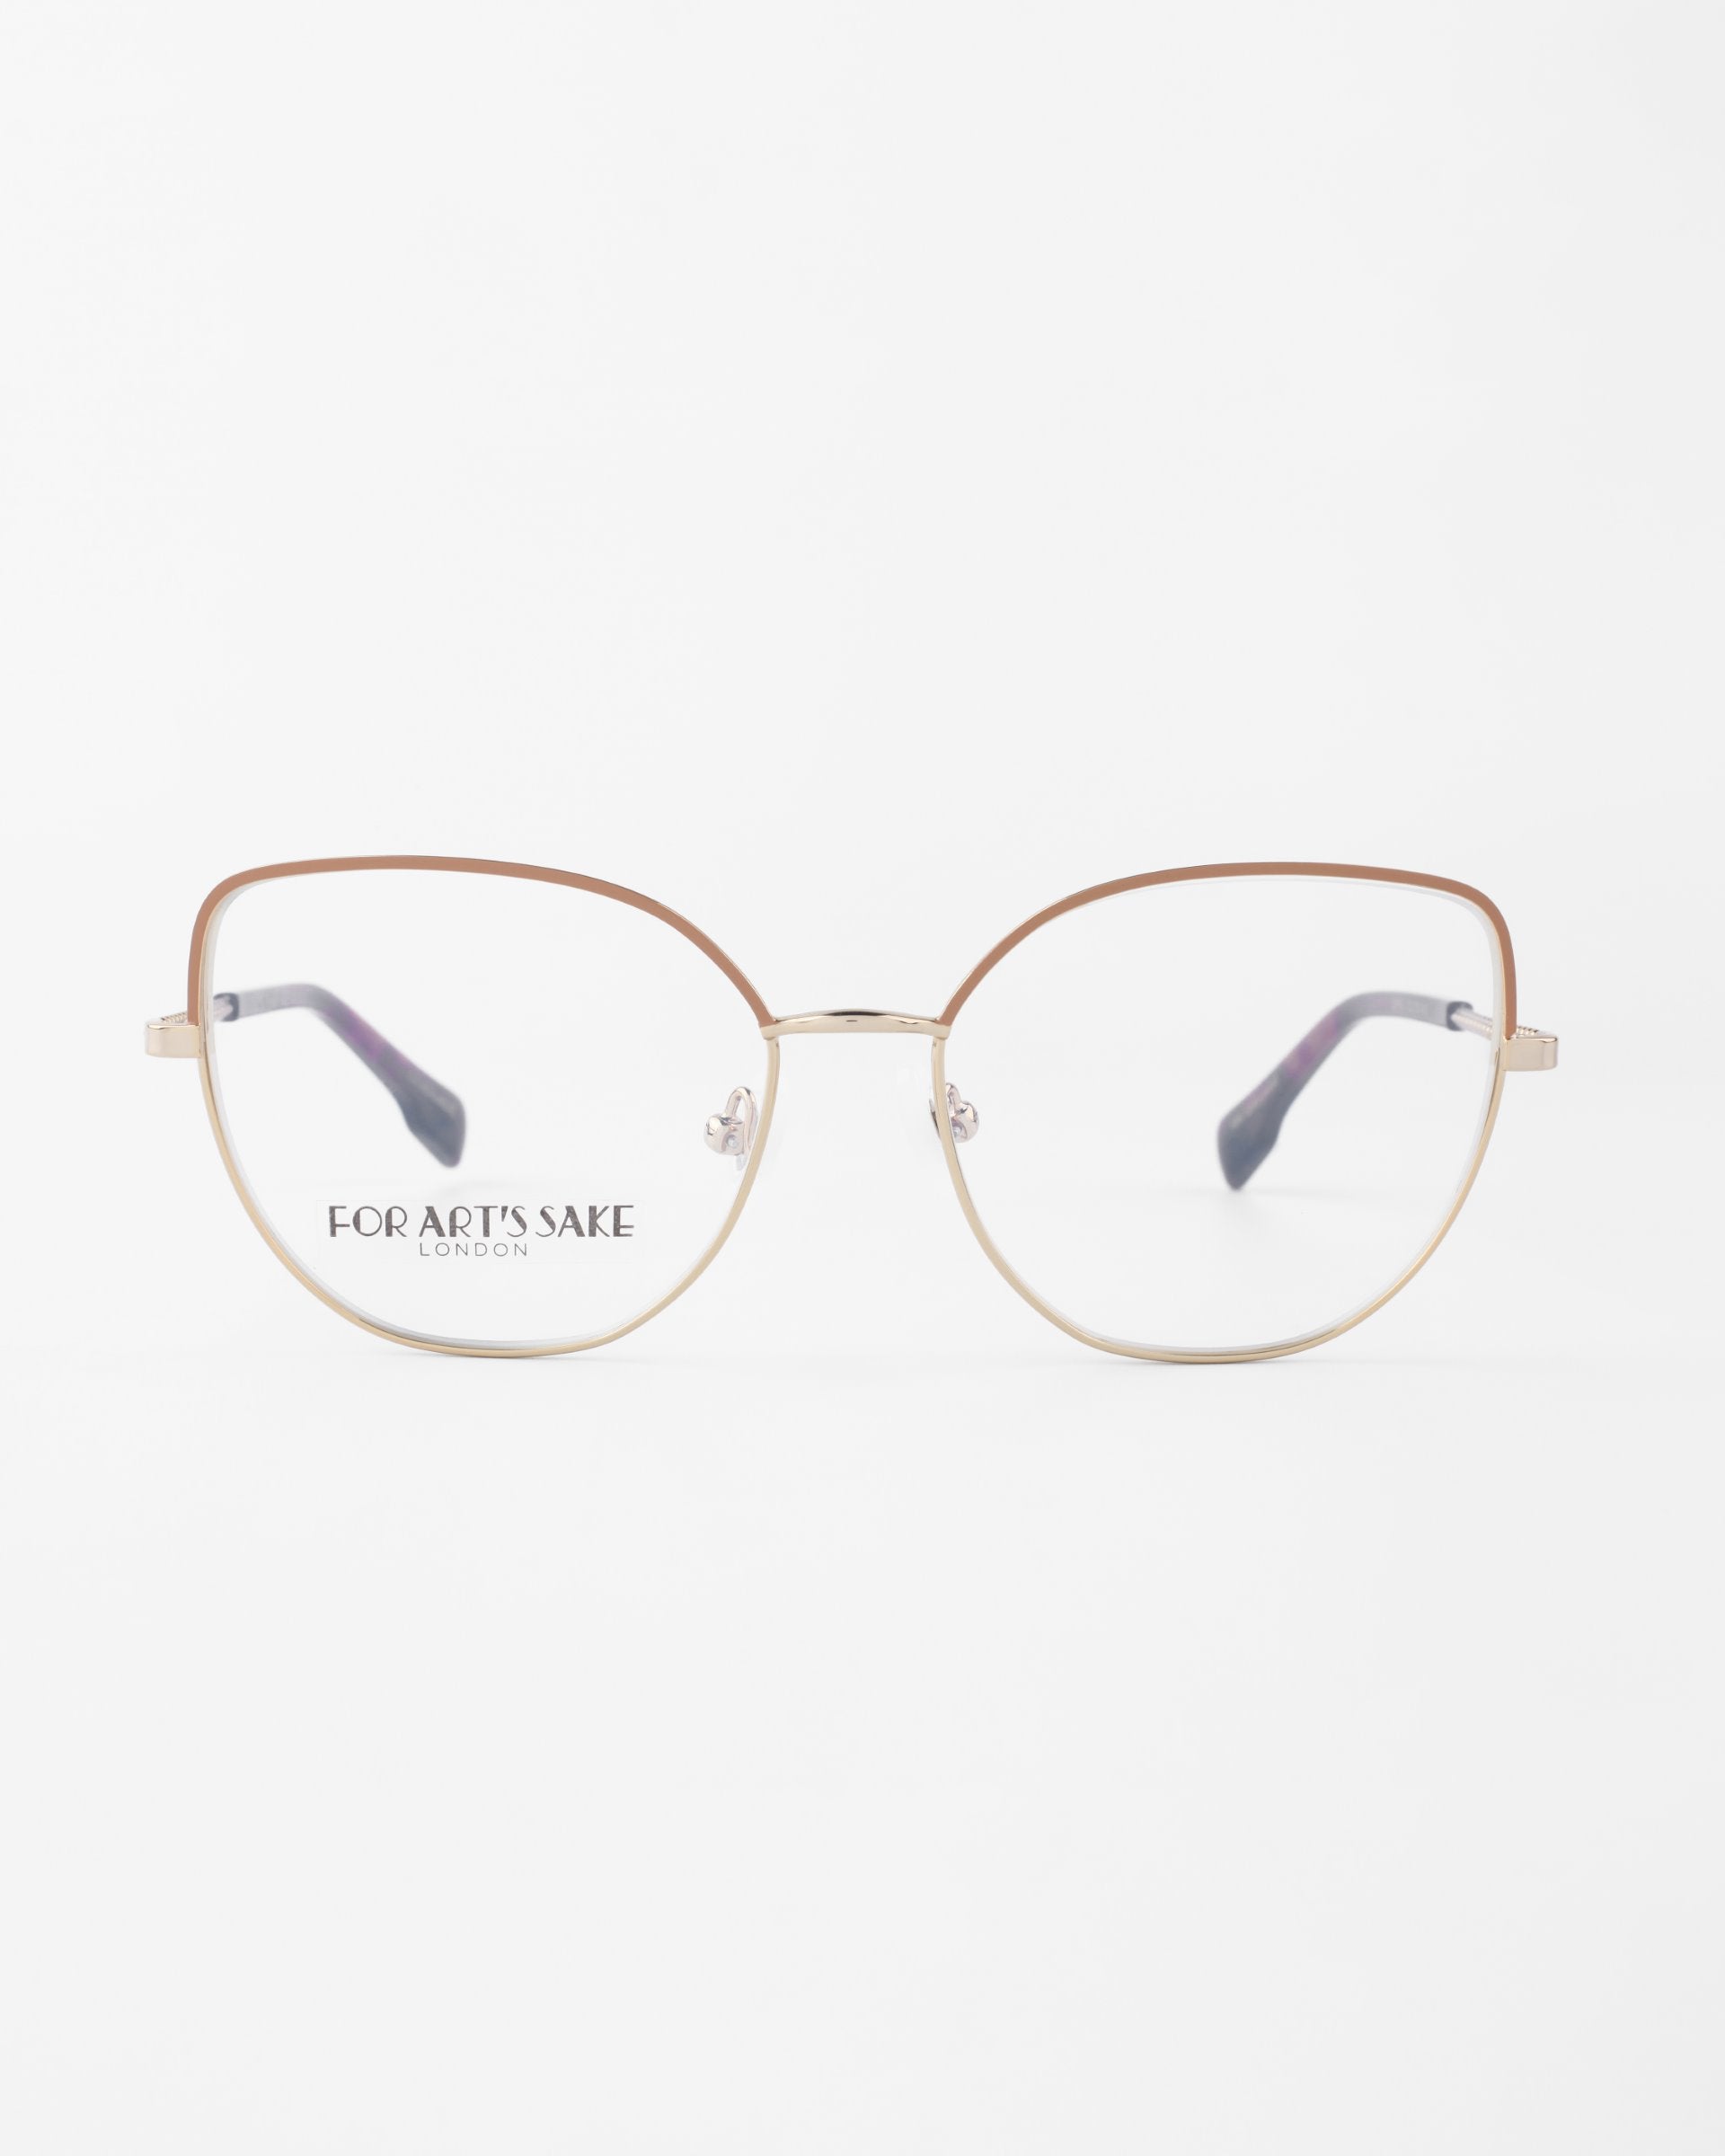 A pair of stylish, round eyeglasses with slender gold frames and brown-tinted upper rims. The clear lenses, featuring a slight cat-eye silhouette, come with a blue light filter. "For Art's Sake® Ophelia" is printed on the inside of the left lens. The background is plain white.